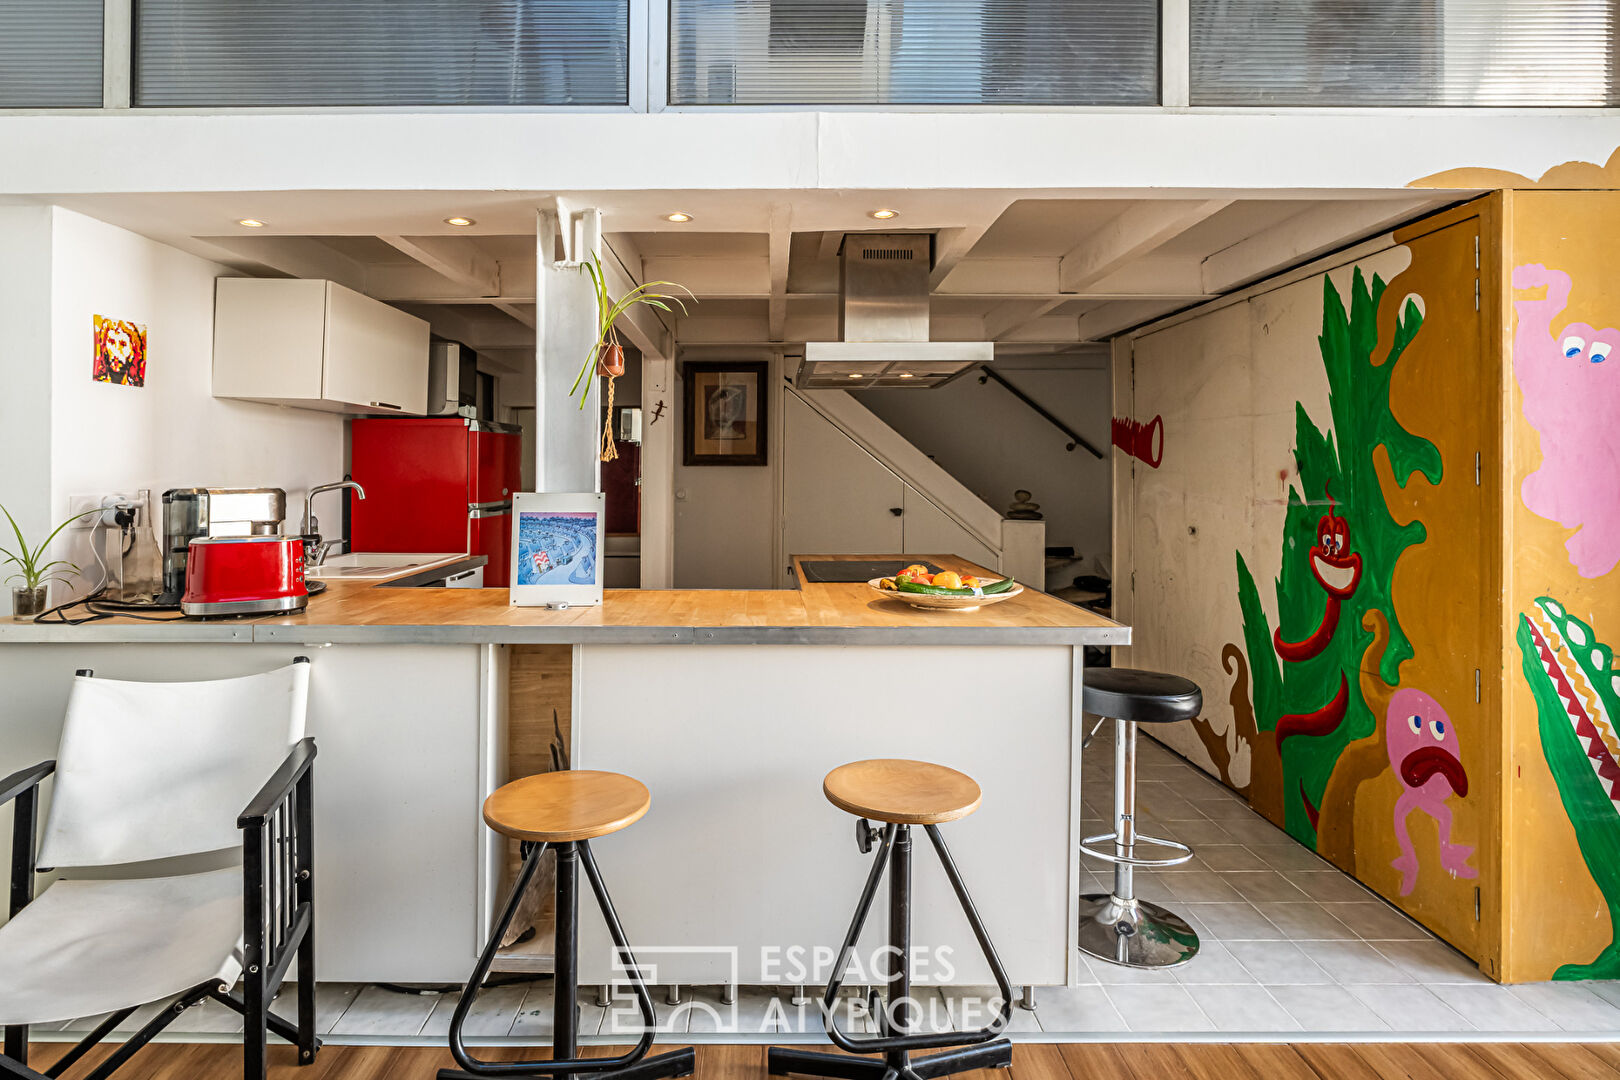 Former artist’s studio renovated into a loft with interior courtyard